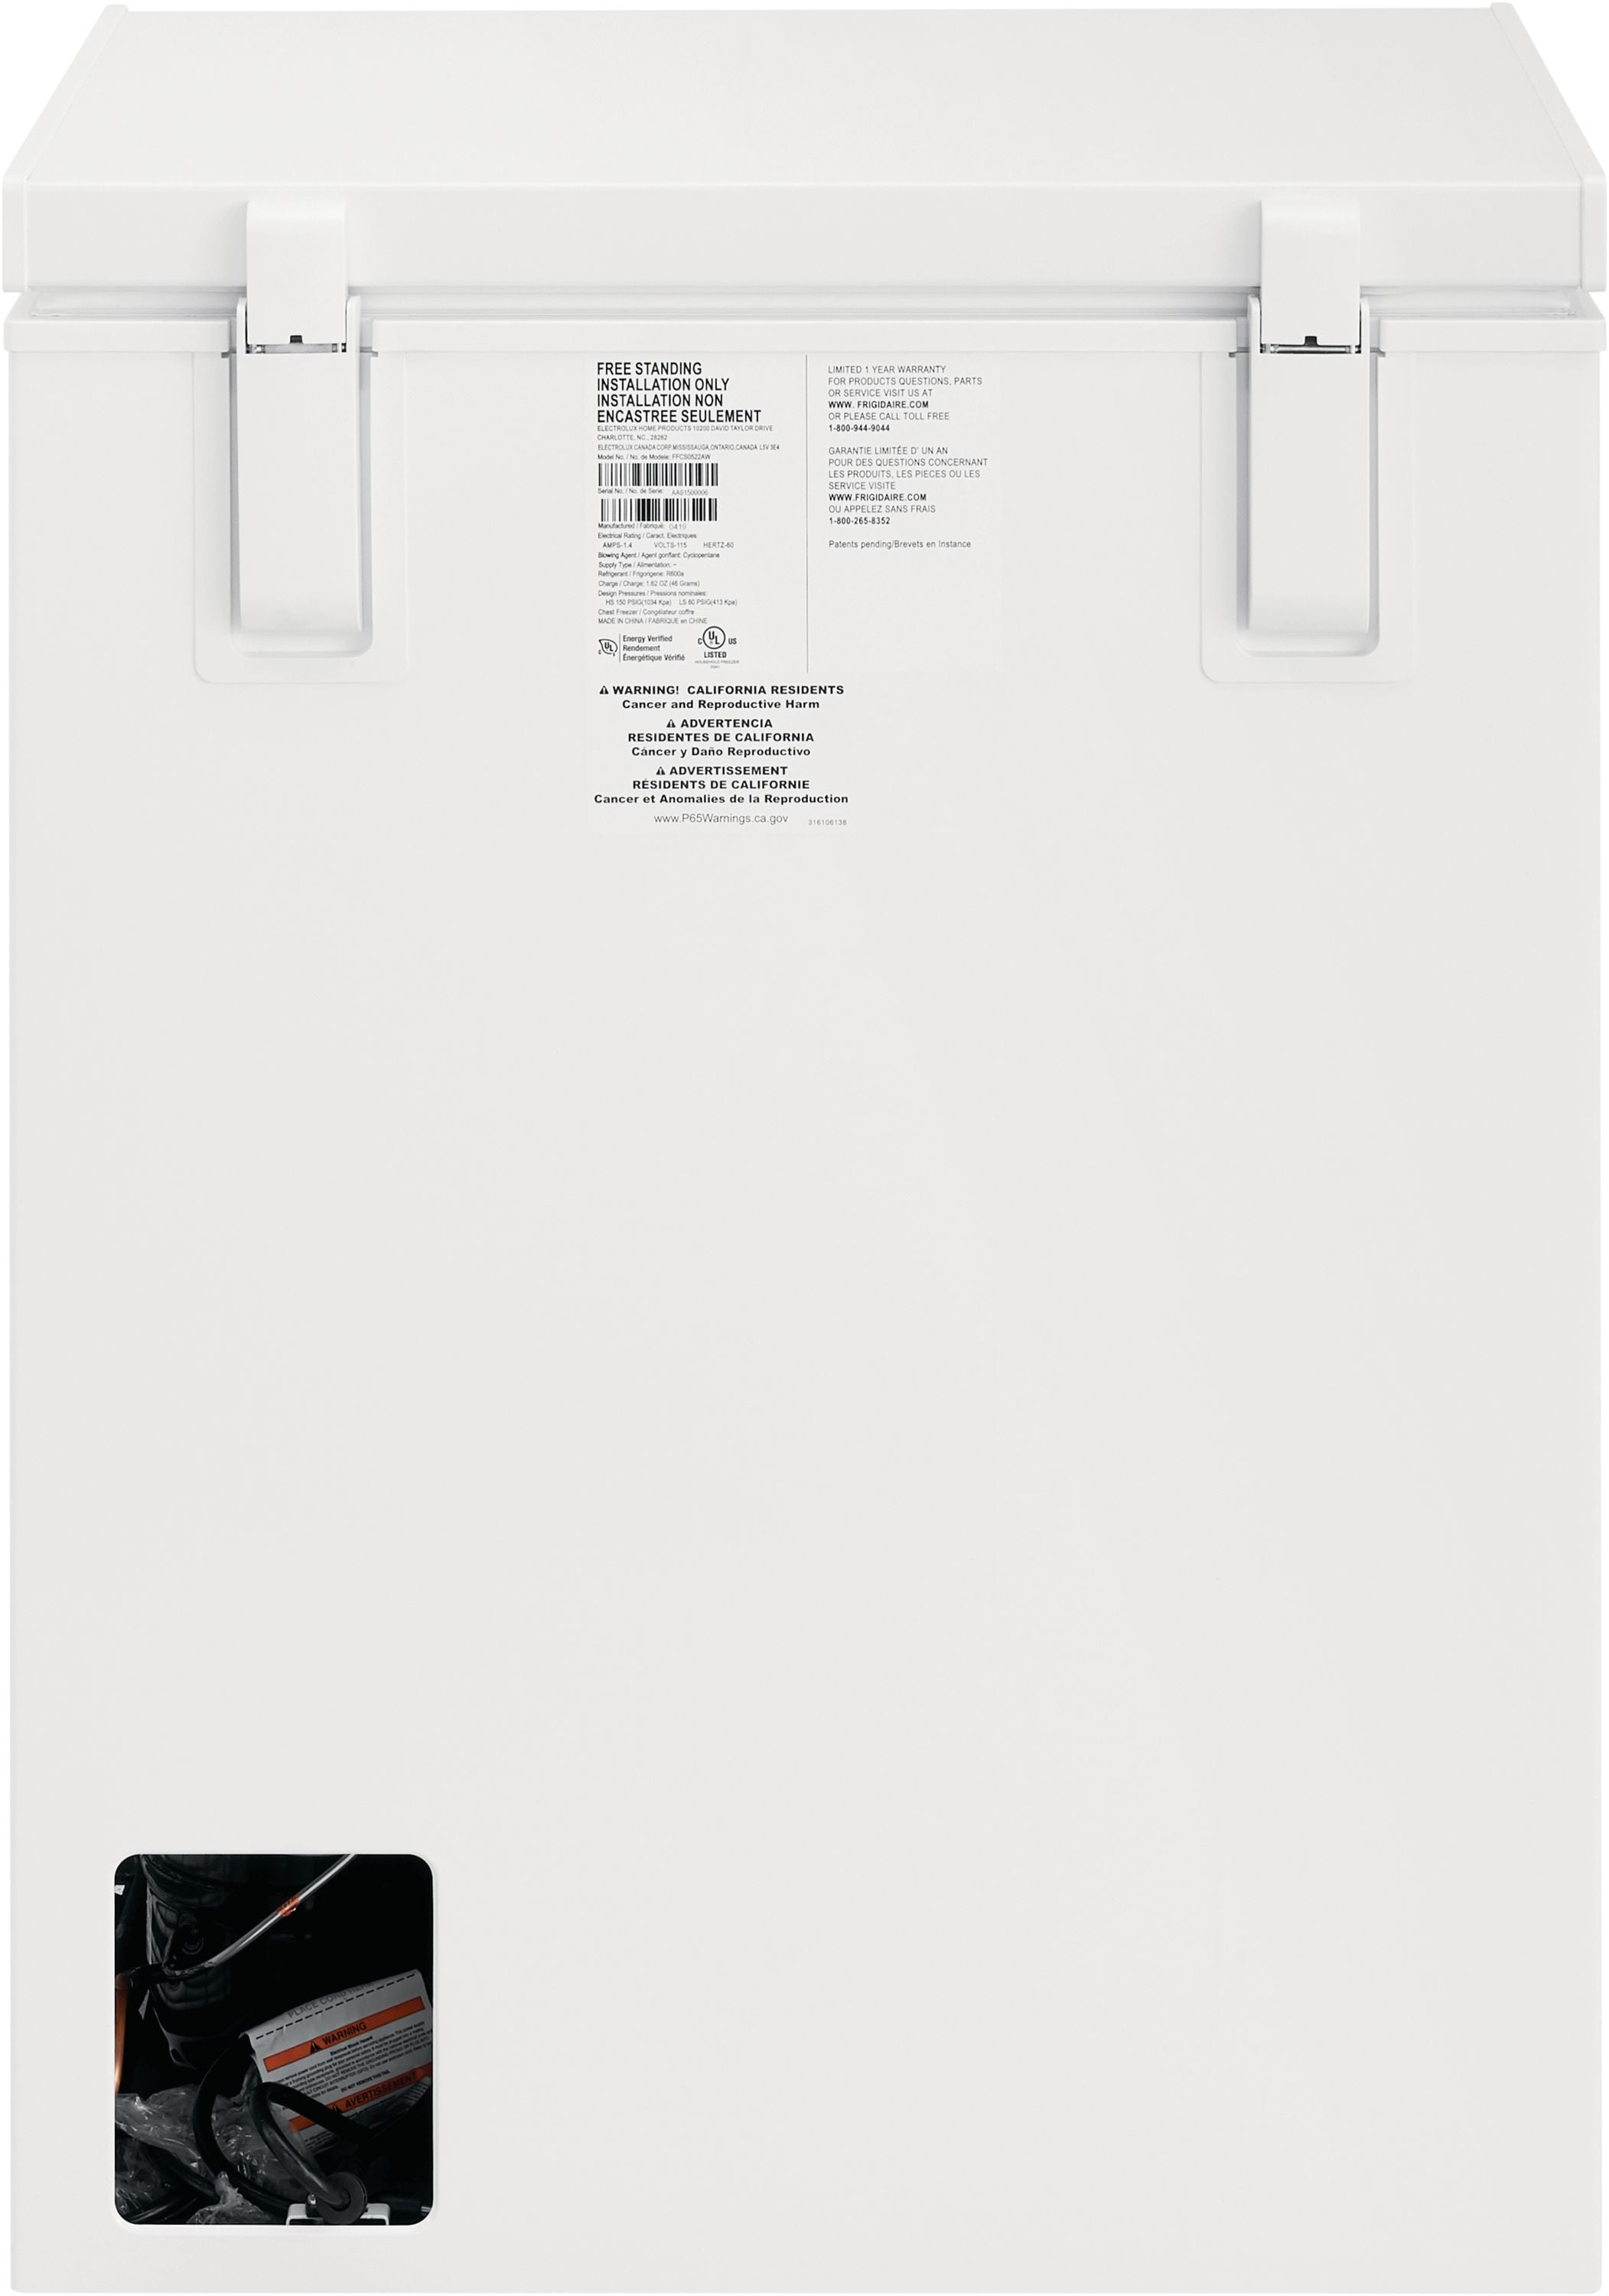 5 cu. ft. Manual Defrost Chest Freezer in White